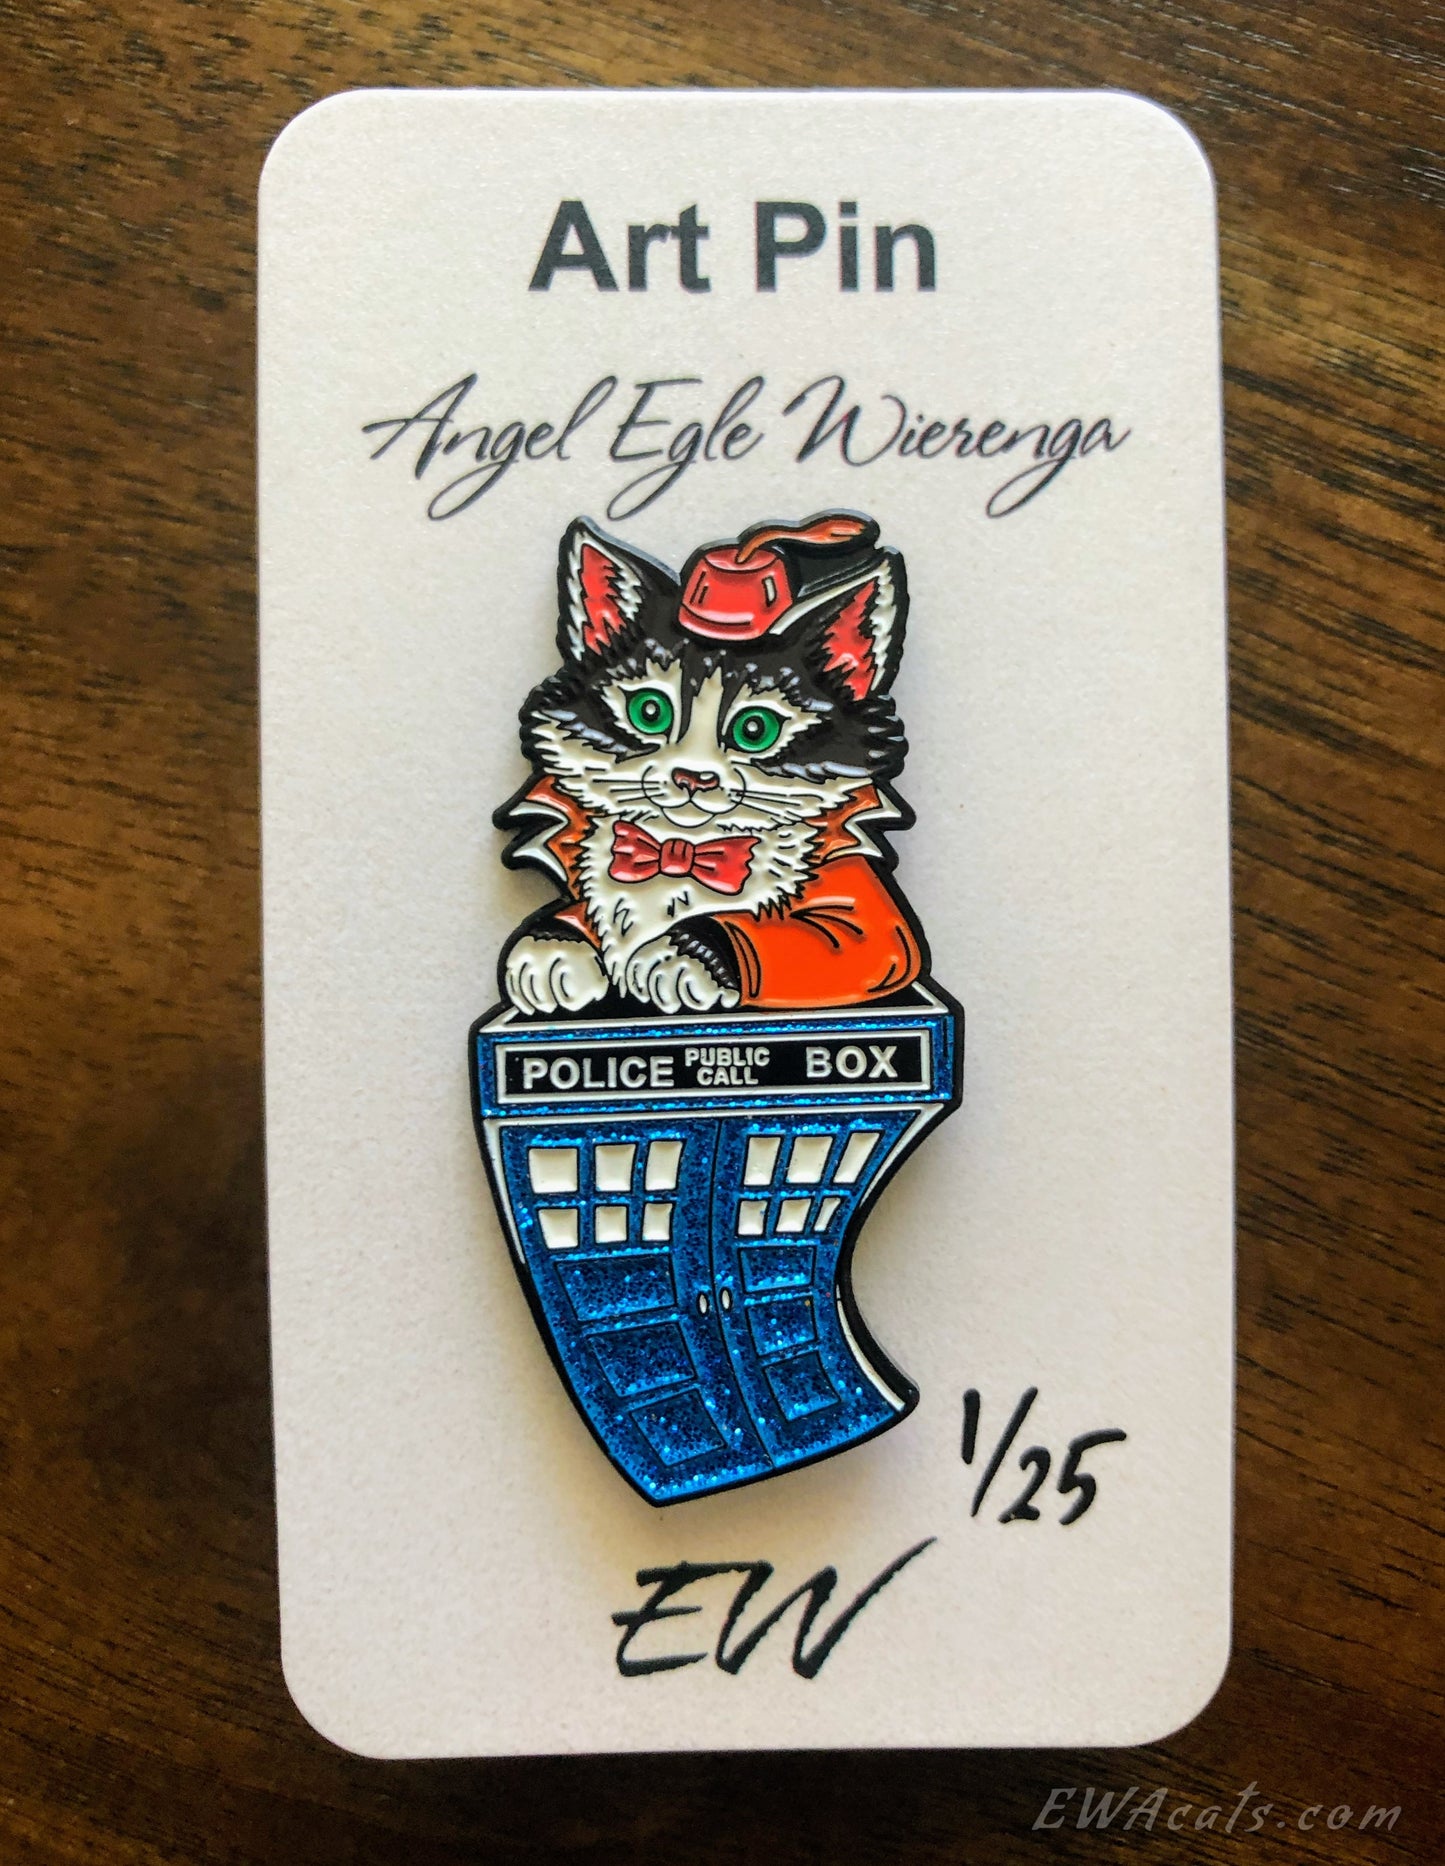 ENAMEL PIN "Kitty Who" Limited Edition